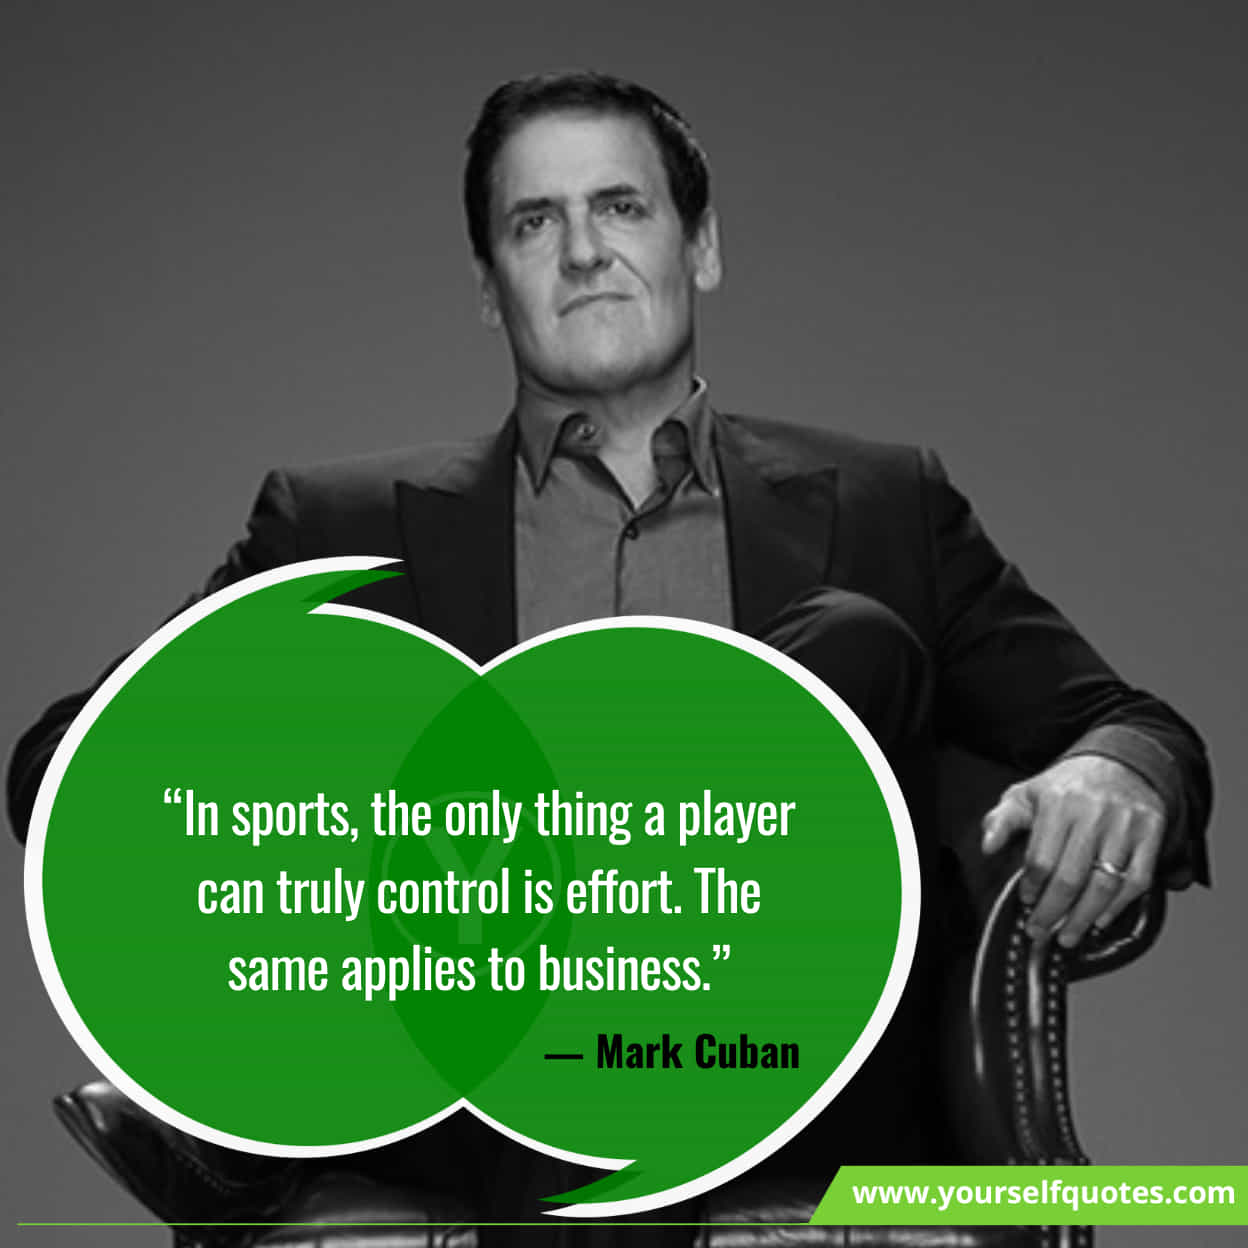 Mark Cuban quotes on innovation and technology